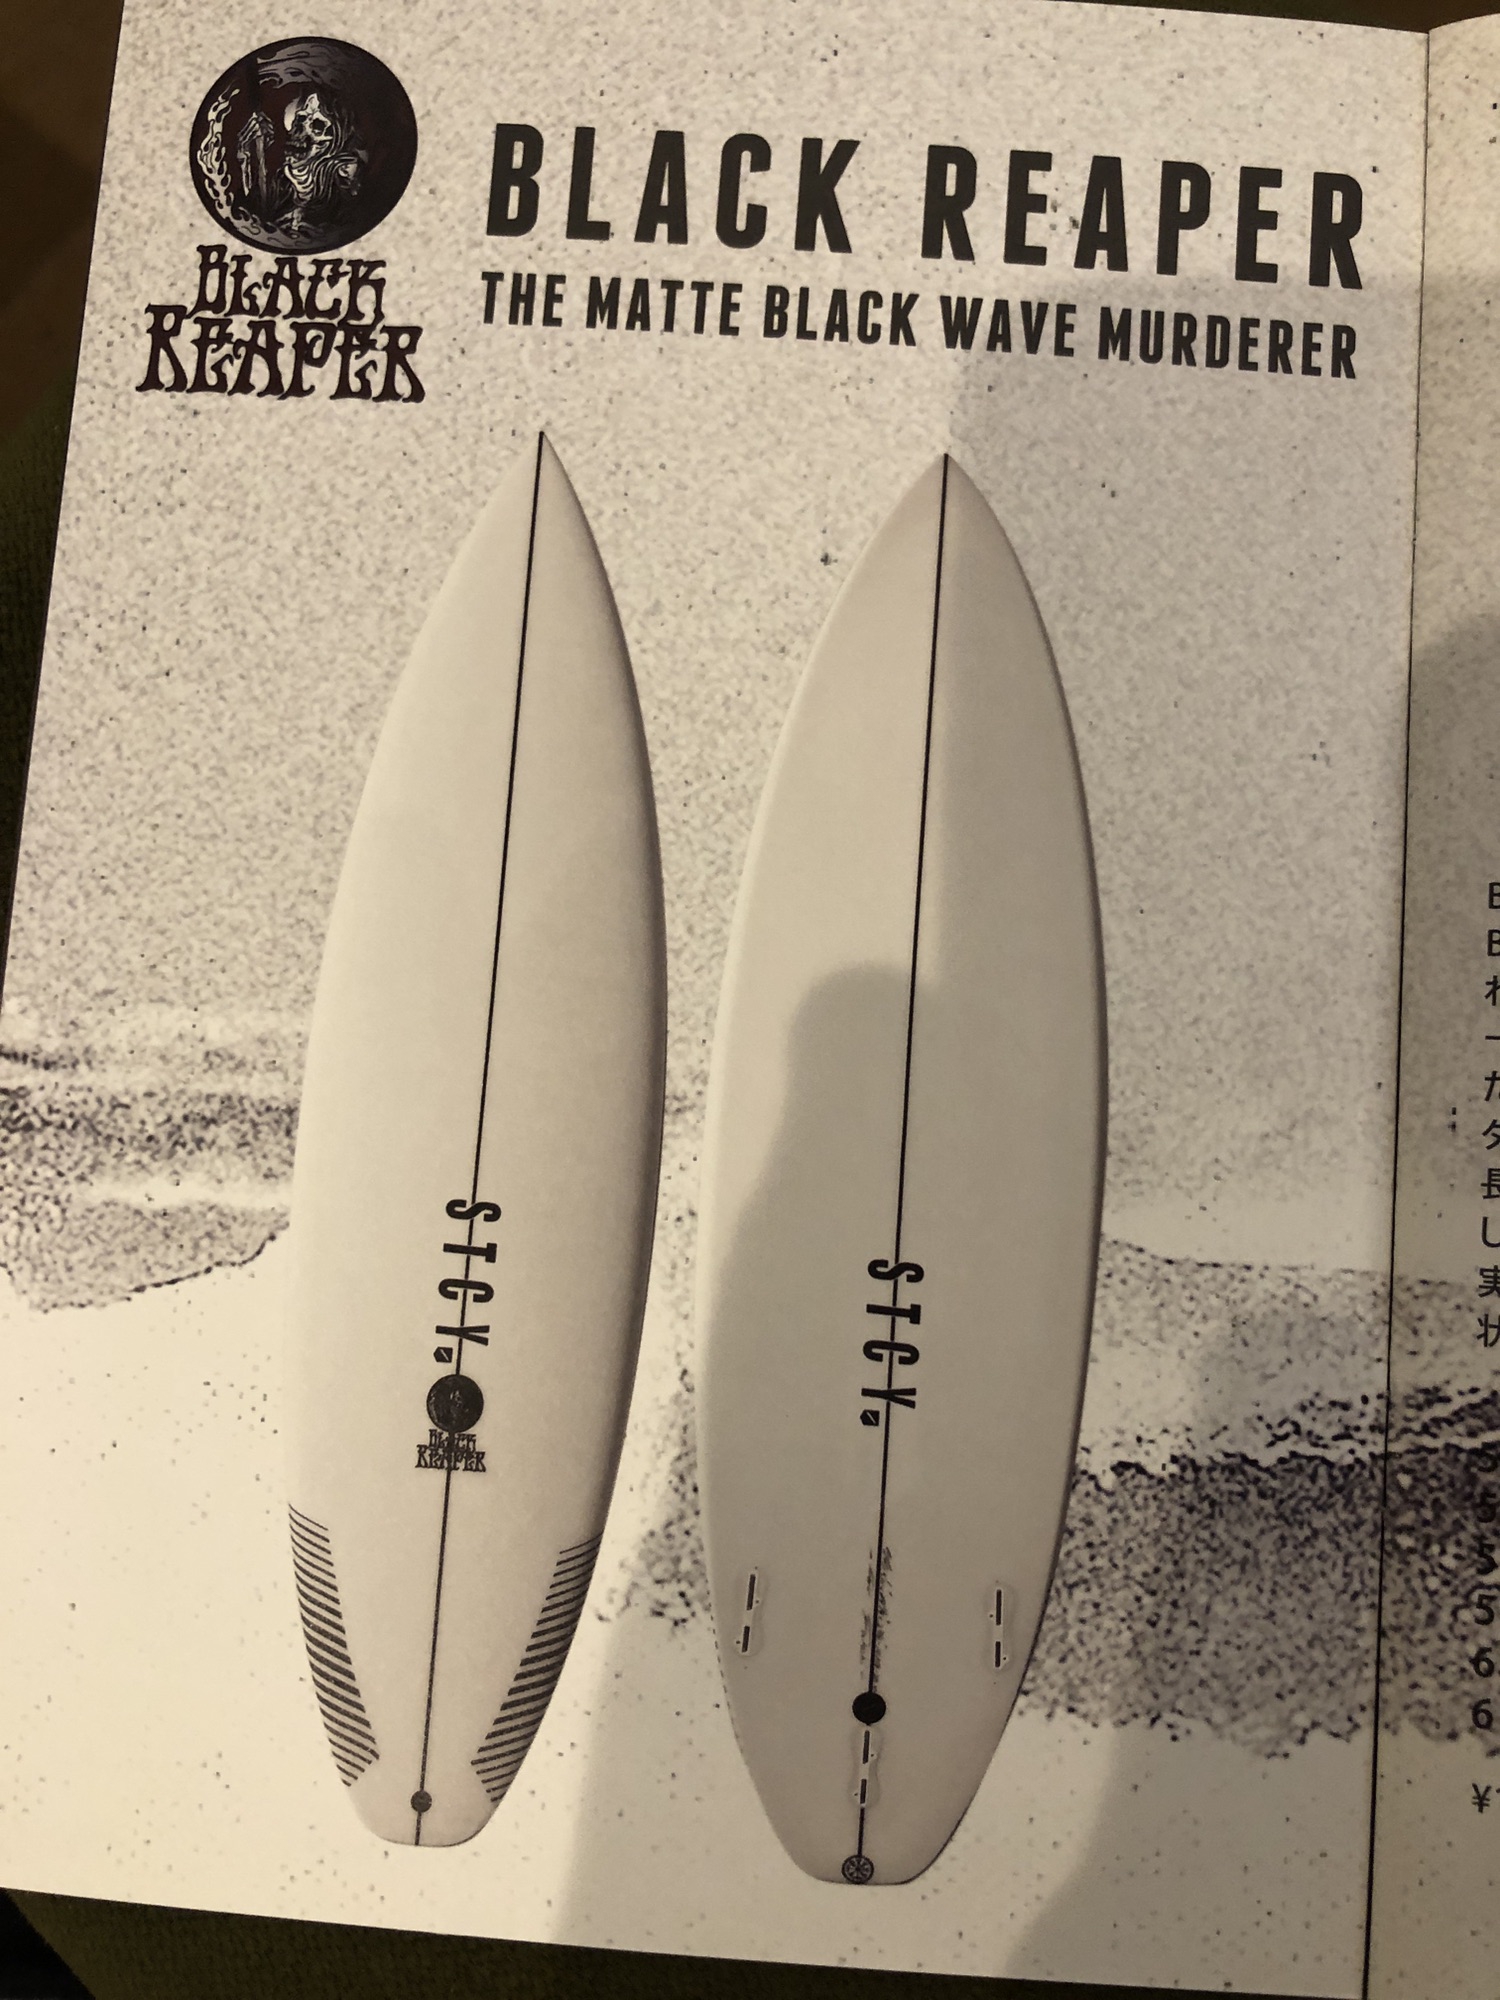 STACEY SURFBOARD 2021 カタログ | STRAY SURF BLOG